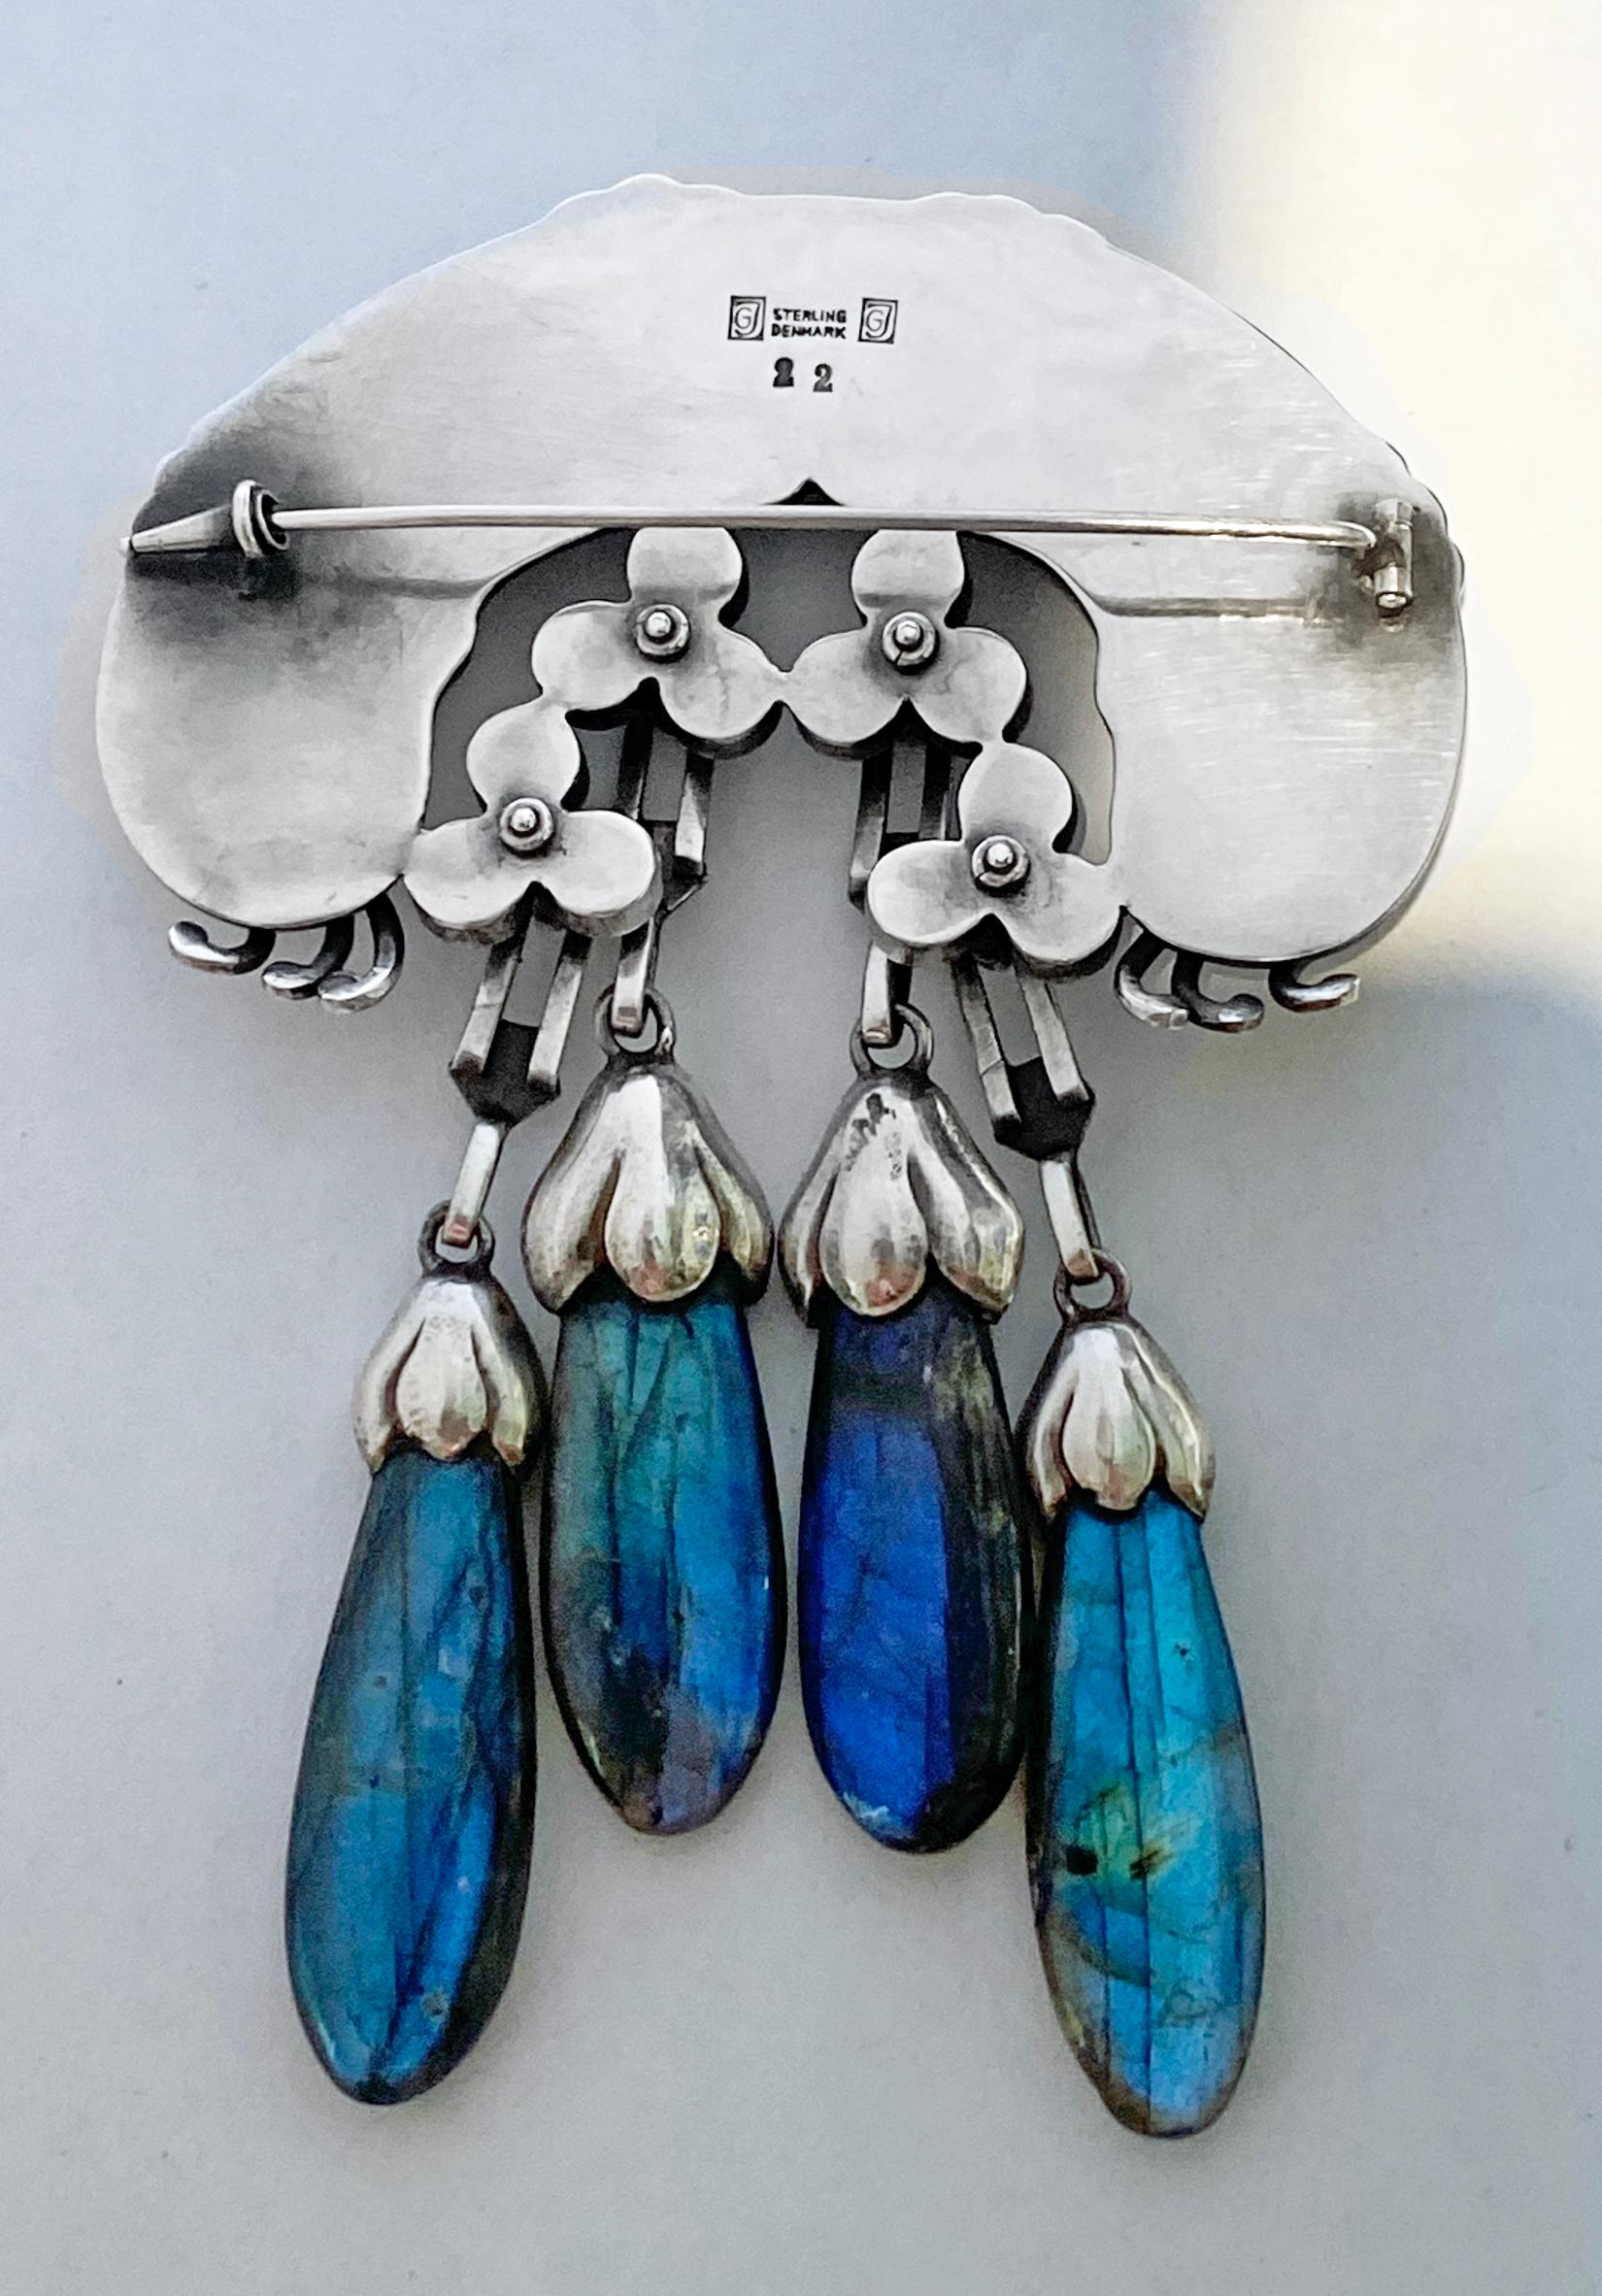 Important Georg Jensen Large rare Silver Labradorite Master Brooch, C.1933.  Georg Jensen. Designed as elaborate foliate and bud motifs set with and suspending labradorite cabochons and drops, no. 12, 11.0 x 7.5 cm, signed GJ in box 925S Sterling